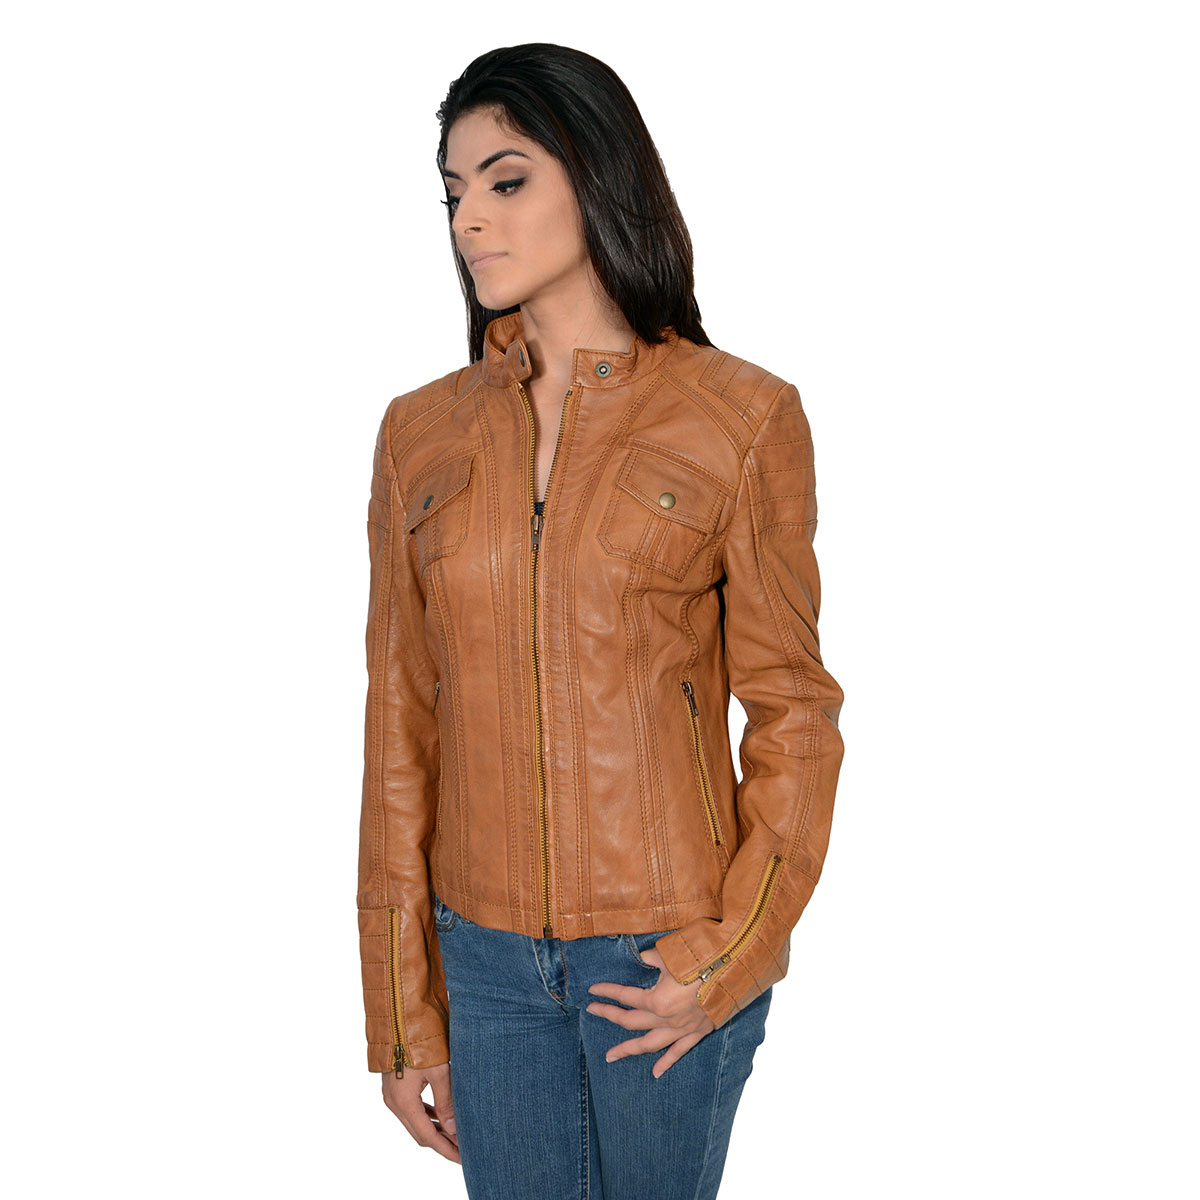 Milwaukee Leather SFL2805 Women's Cognac 'Quilted' Mandarin Collar Fashion Casual Leather Jacket 4X-Large - image 1 of 2